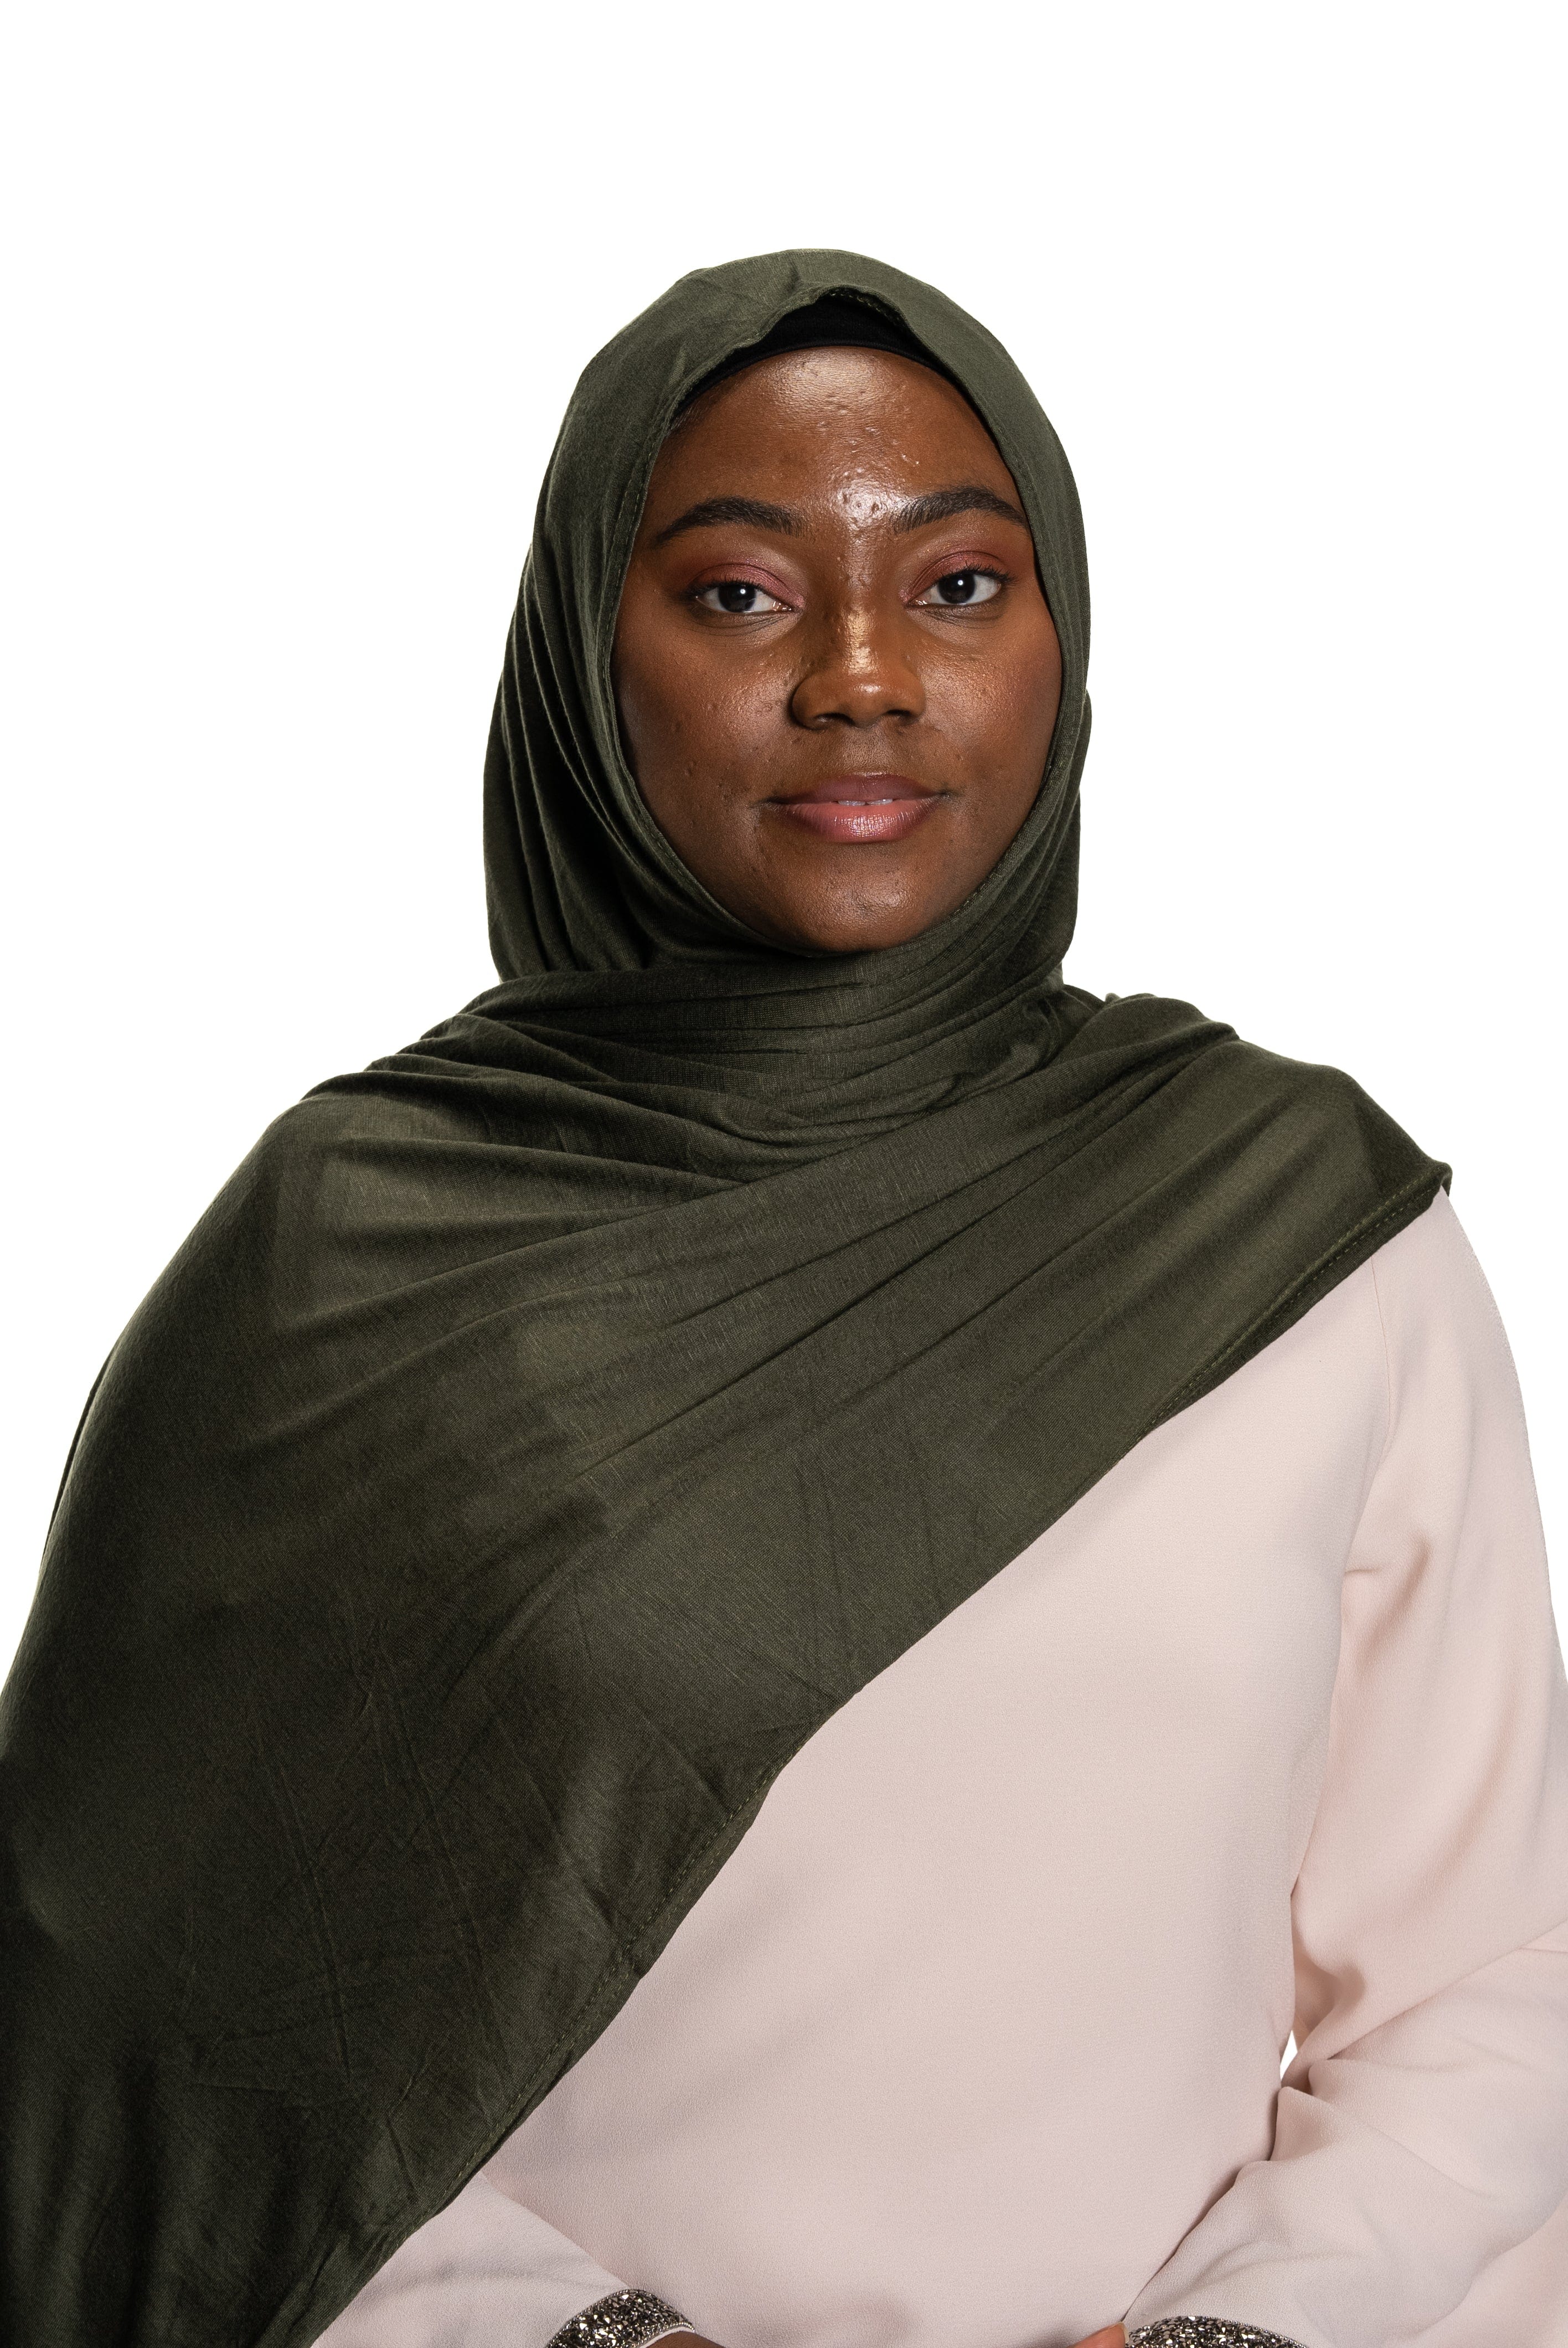 Jolie Nisa Hijab Olive Premium Slip-on Jersey Instant Head Scarf Wrap for Effortless and Stylish Hijab Wear Premium Slip-on instant Jersey Head Scarf Wrap for Effortless and Stylish Hijab Wear!